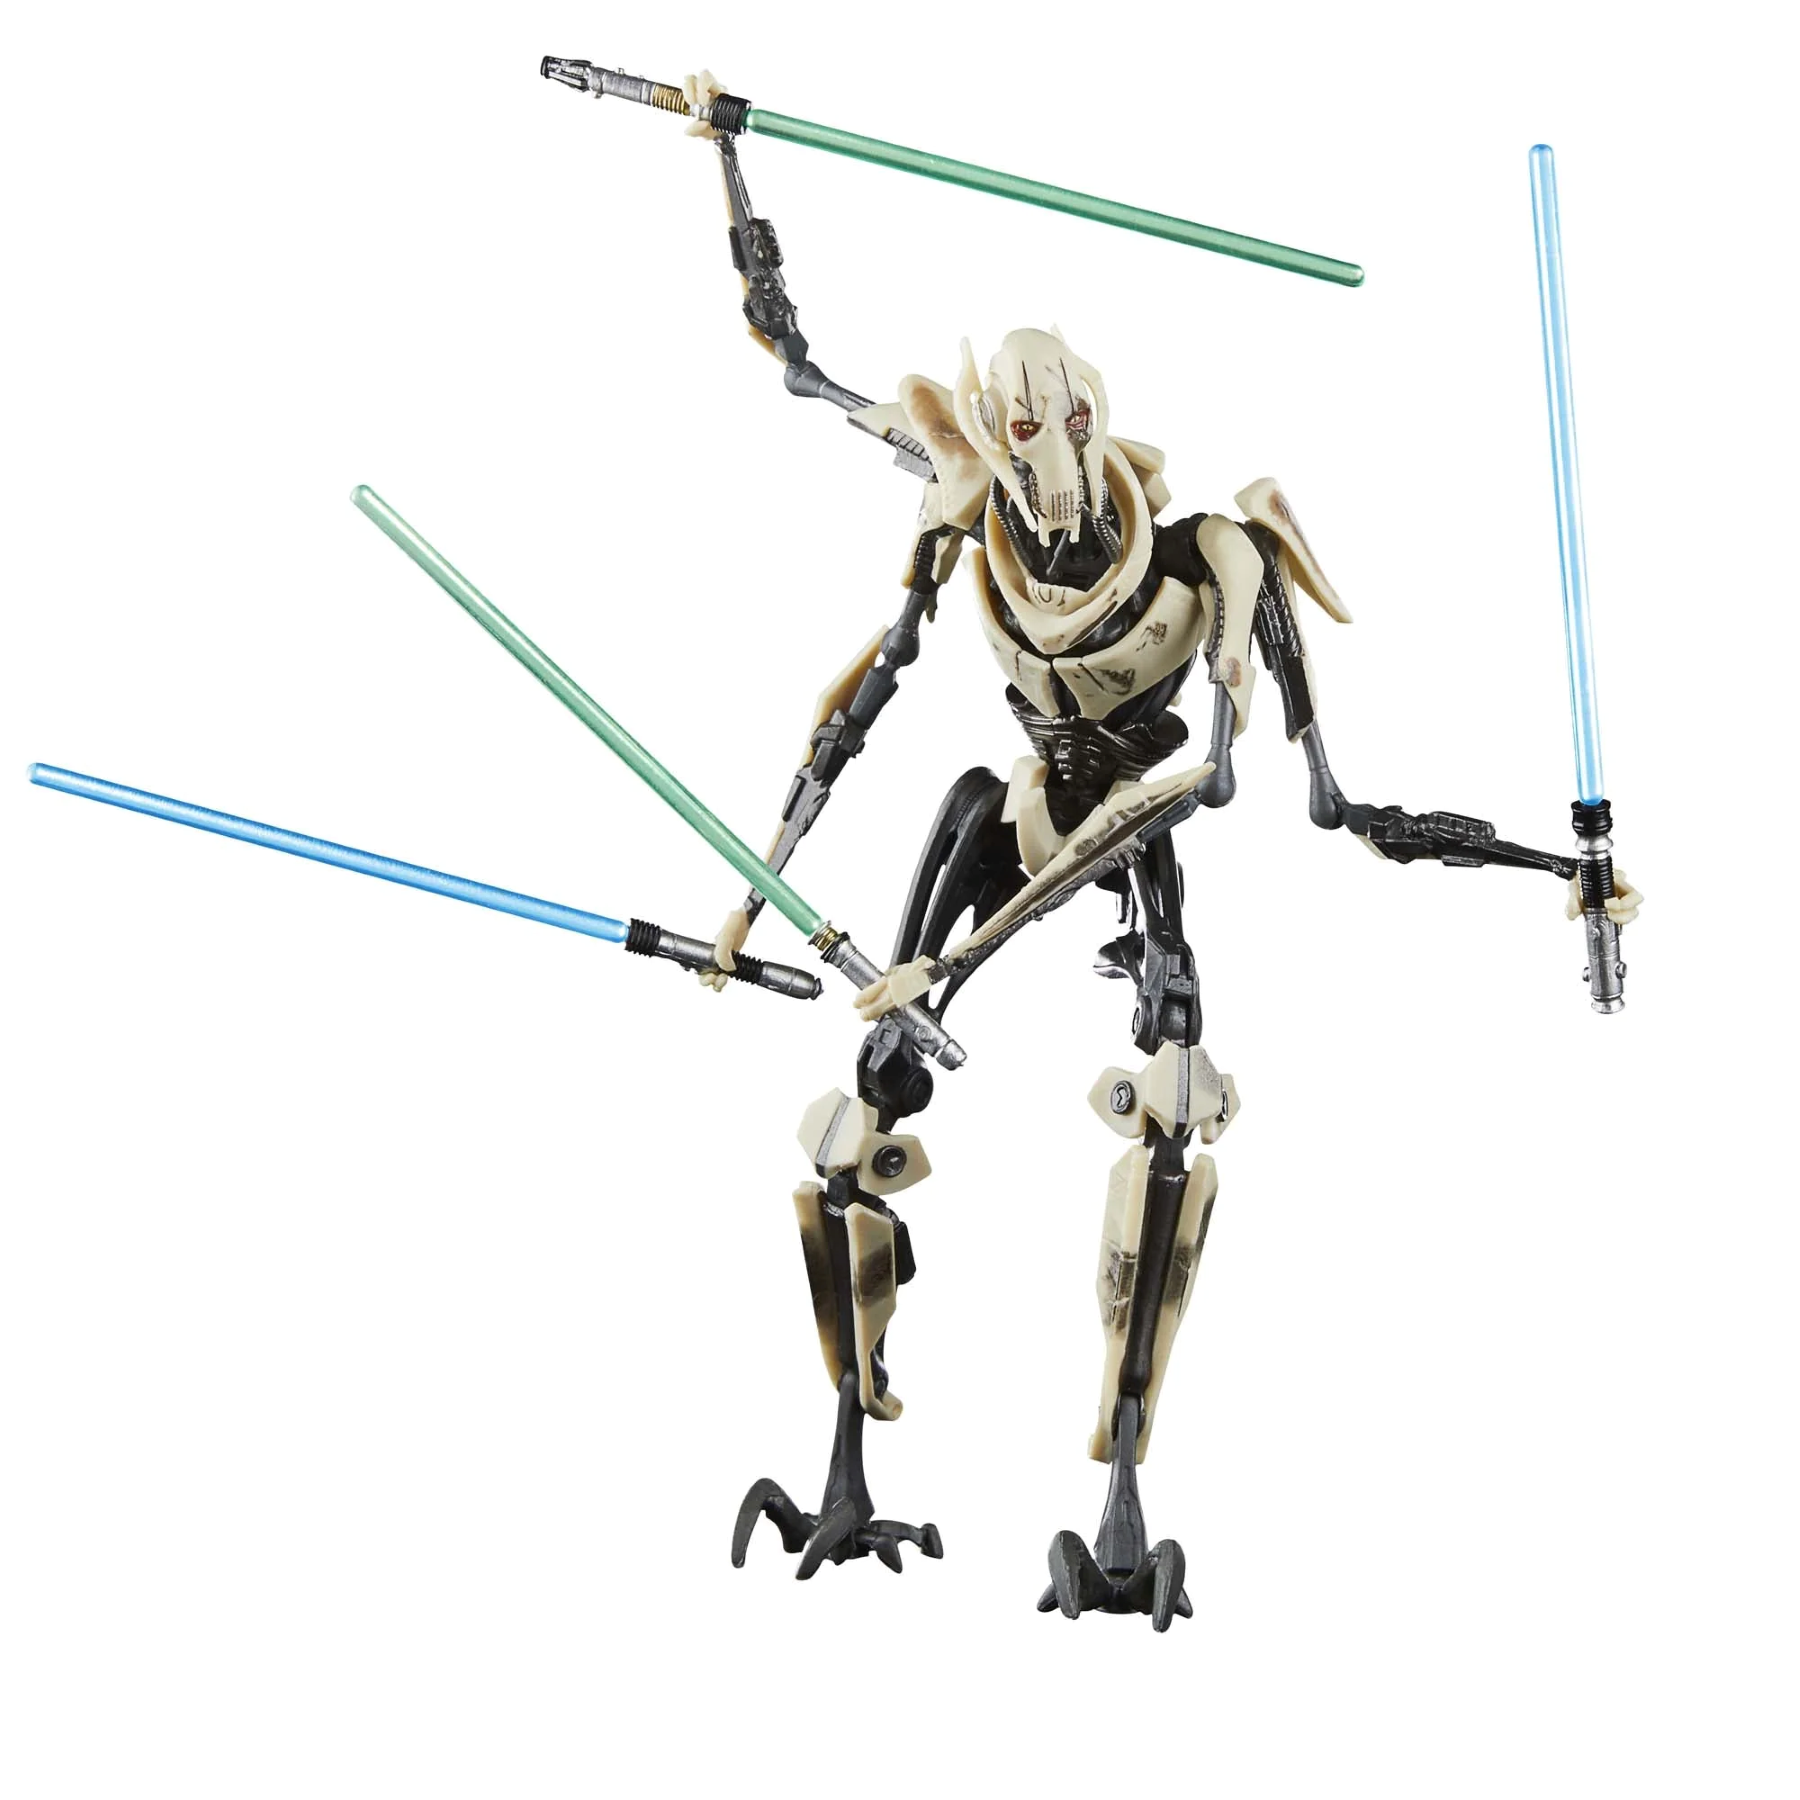 Star Wars The Black Series General Grievous Gaming Greats (15 cm)  F8326 5010996211903